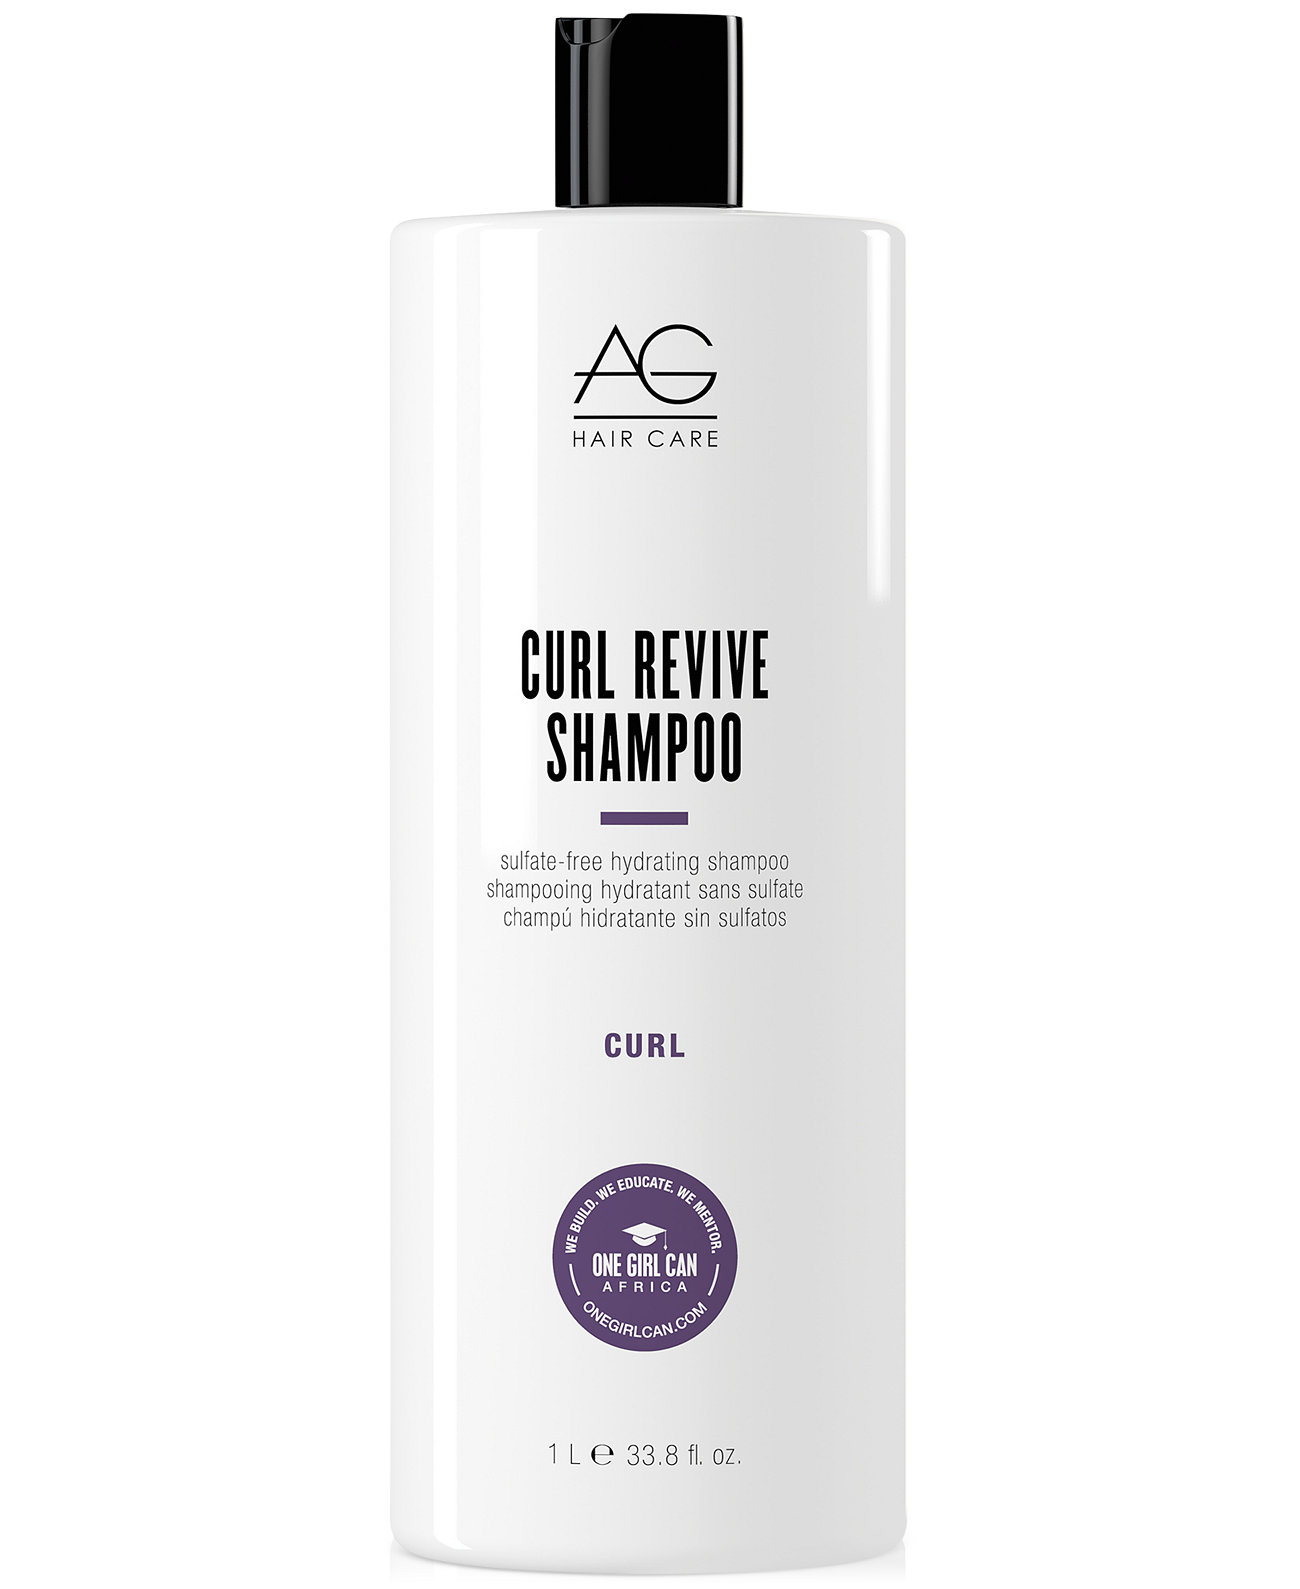 Curl Revive Sulfate-Free Hydrating Shampoo, 33.8-oz., from PUREBEAUTY Salon & Spa AG Hair